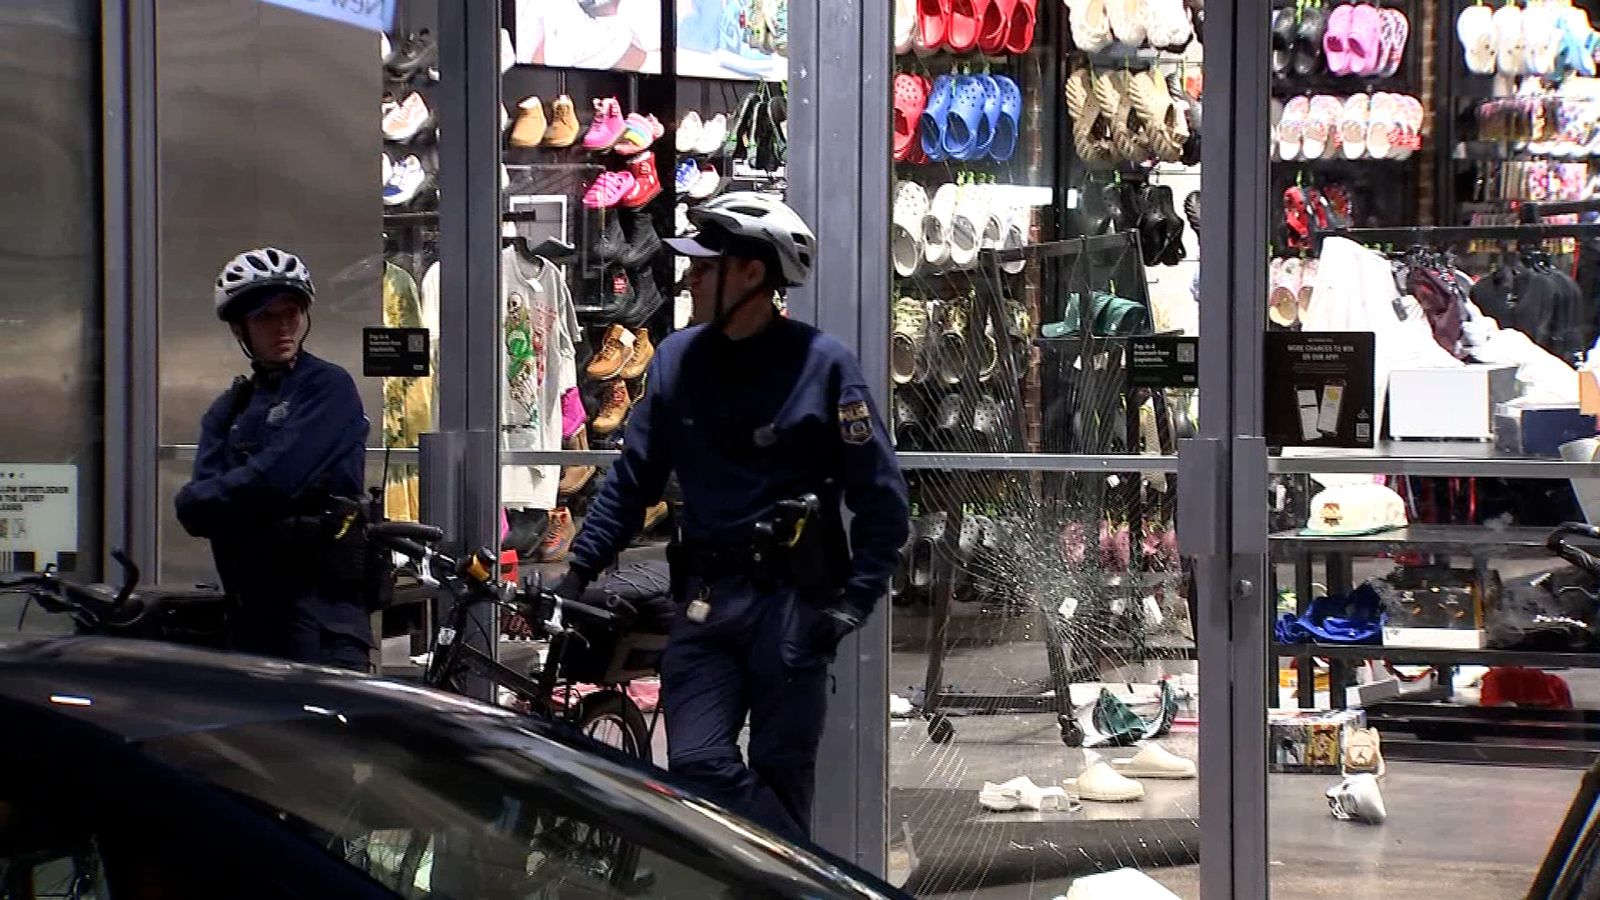 52 people arrested after looters target stores across Philadelphia